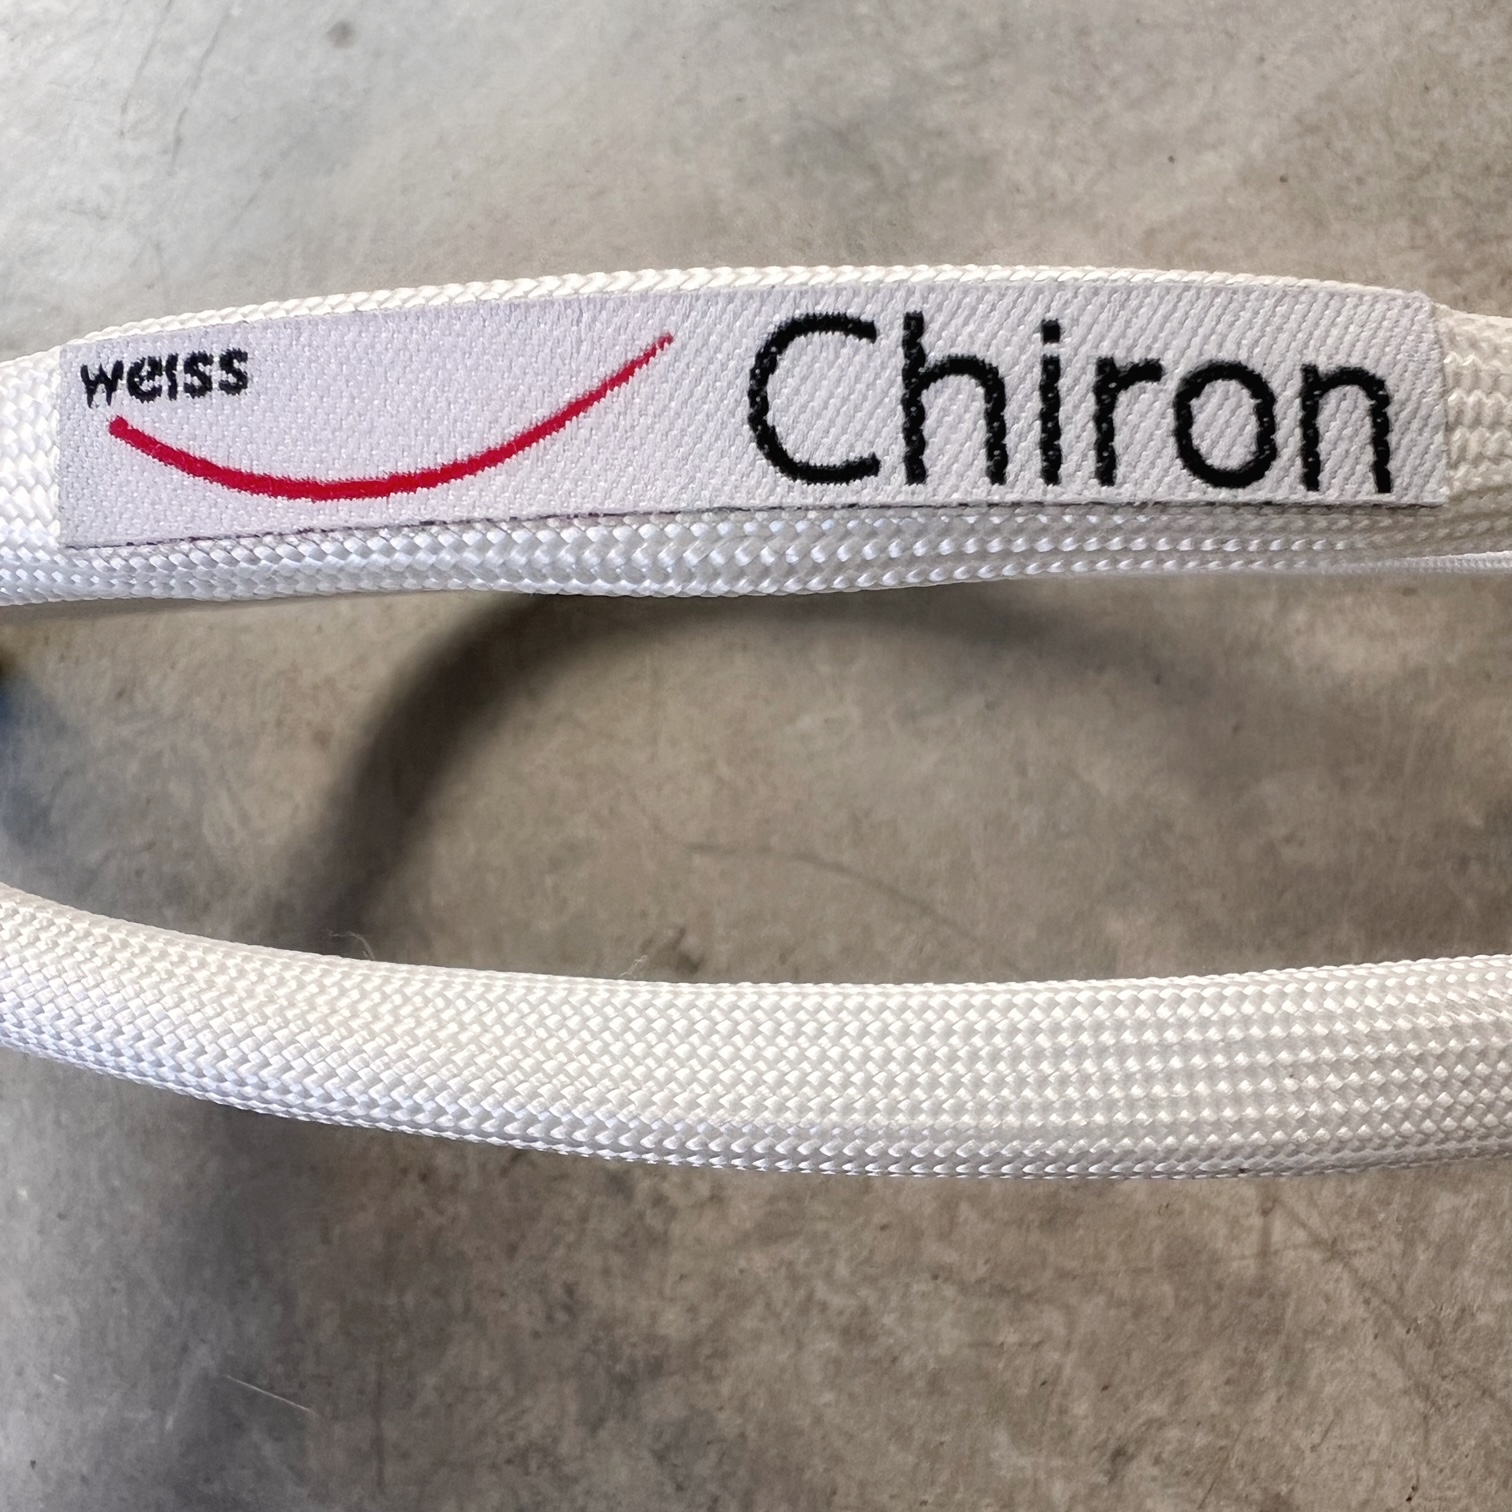 CABLE WEISS CHIRON